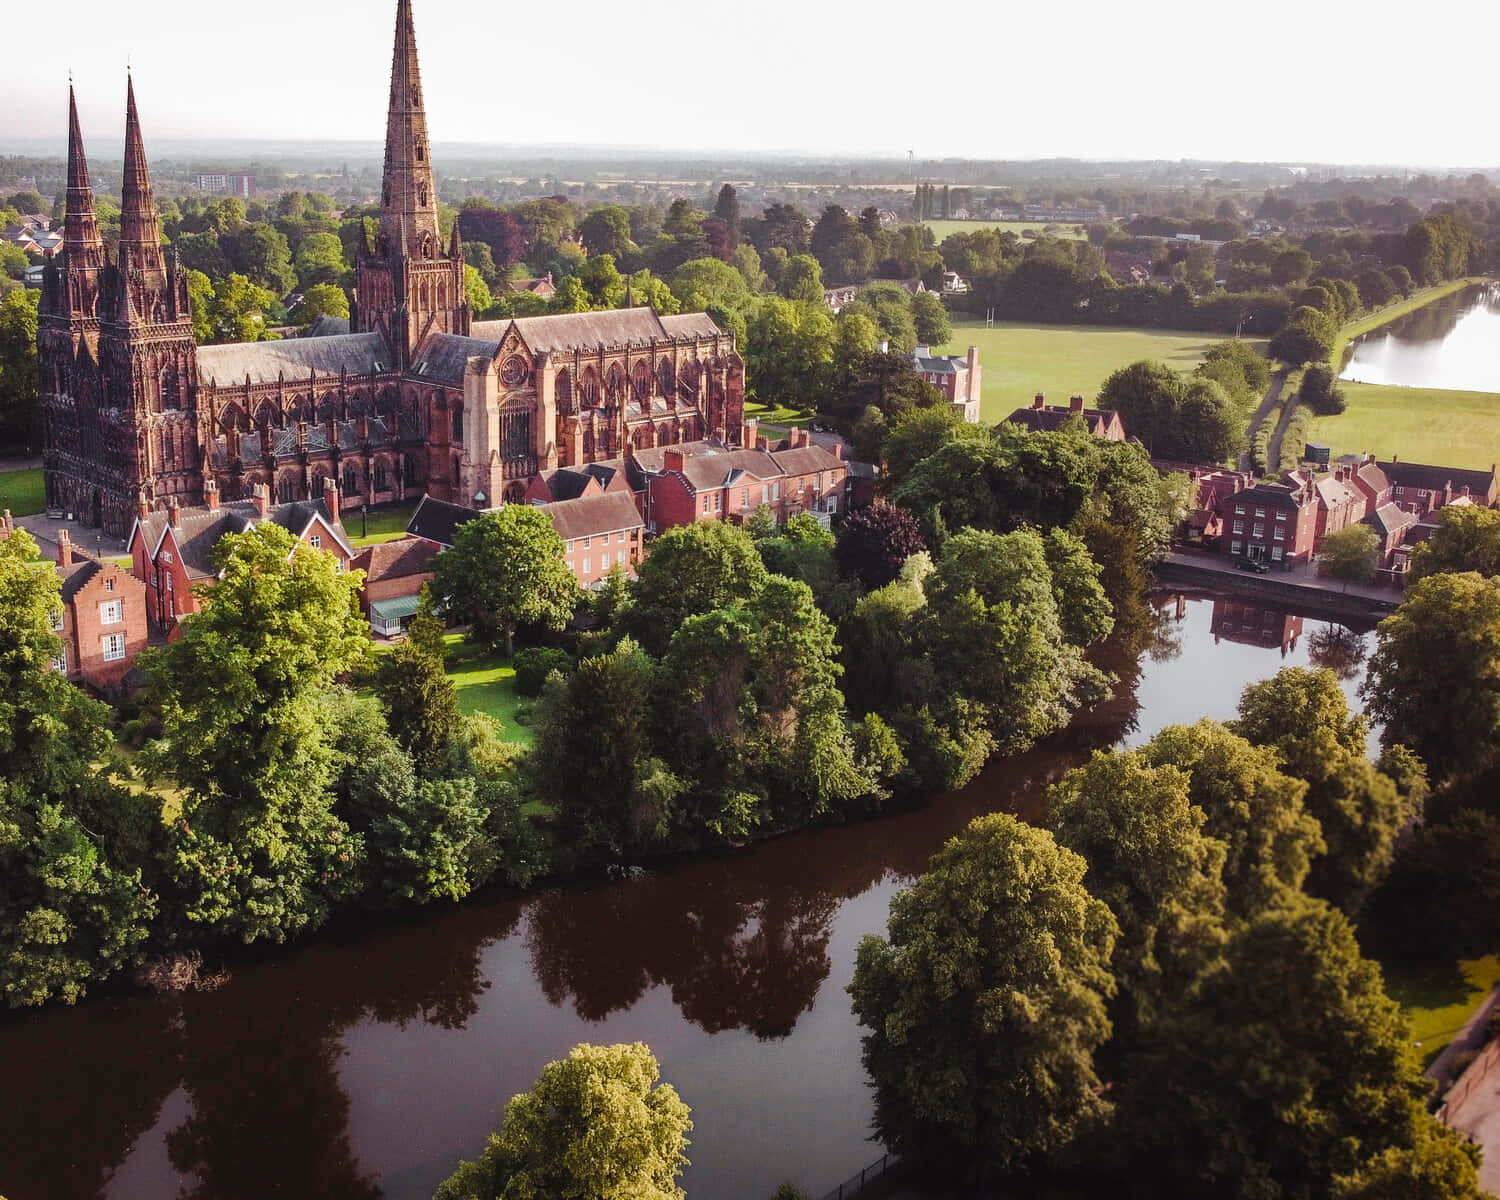 Lichfield Cathedral Aerial View Wallpaper